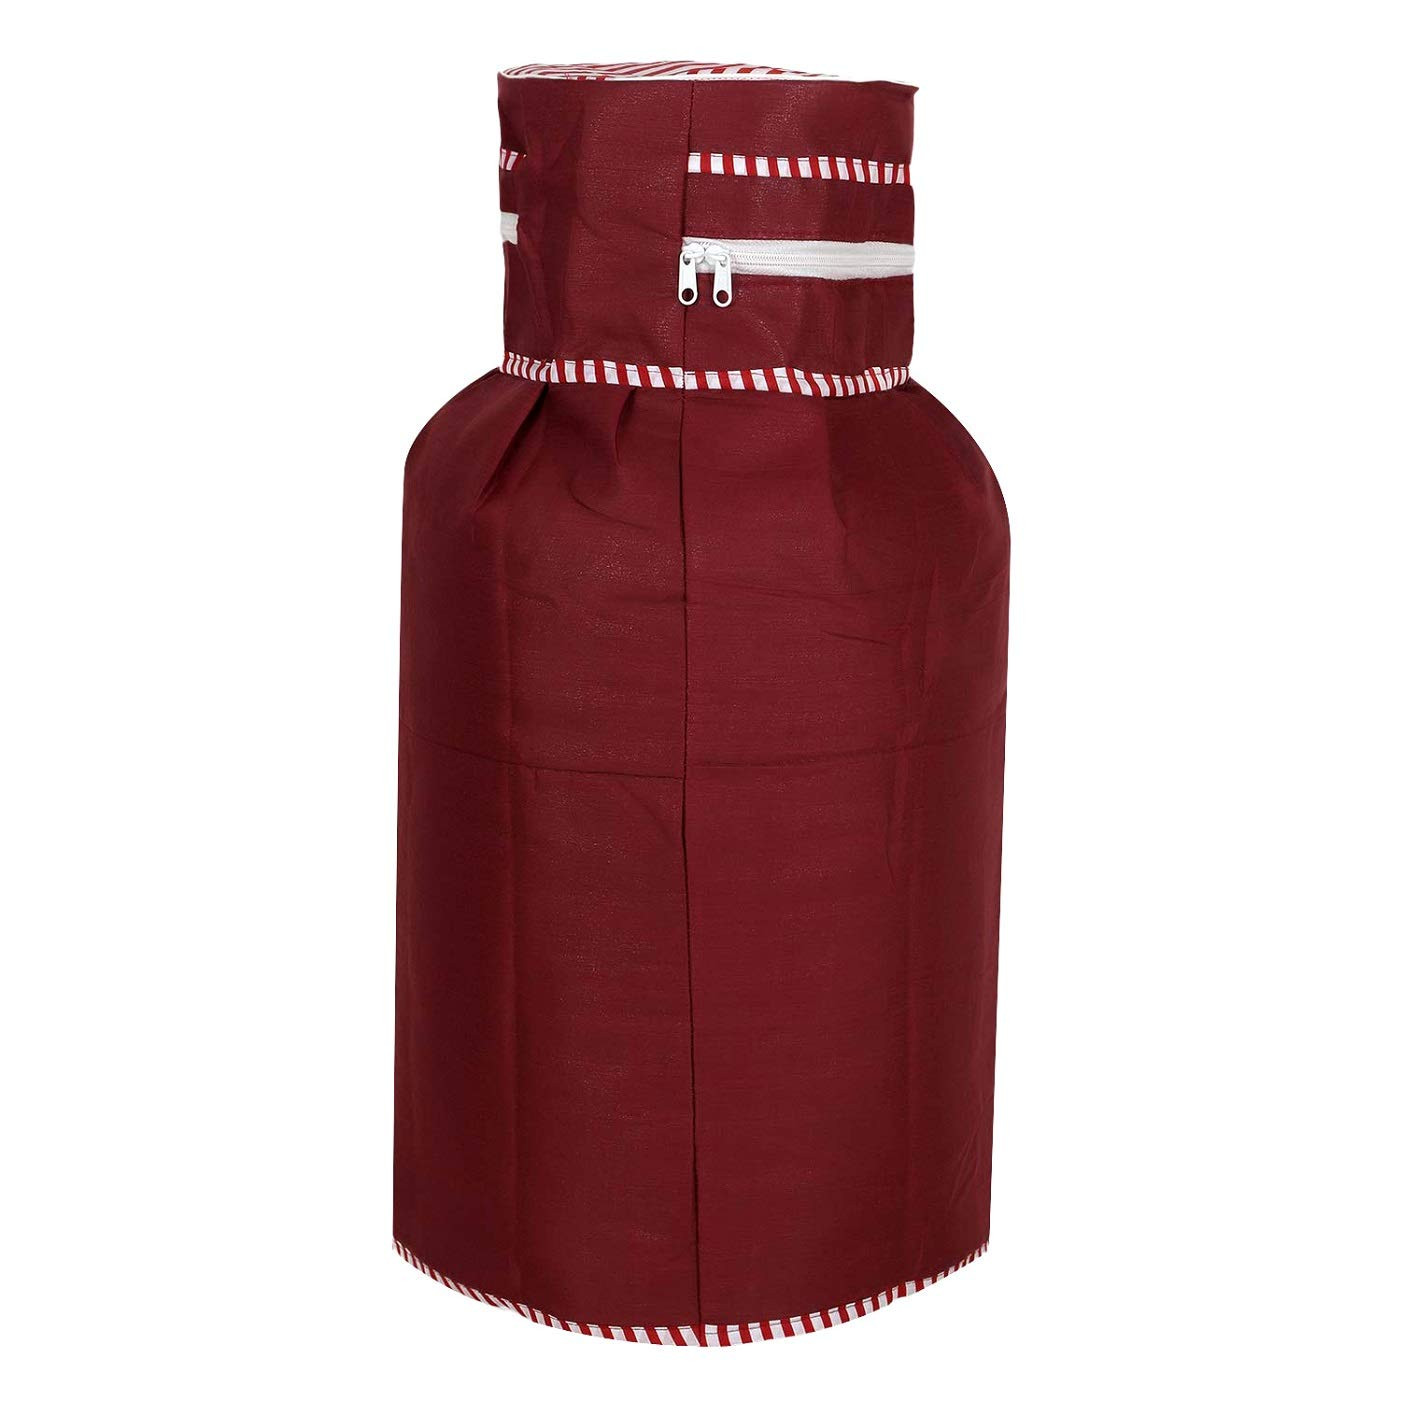 Kuber Industries Cotton Dust-Water Proof LPG Gas Cylinder Cover (Maroon) - CTKTC040744